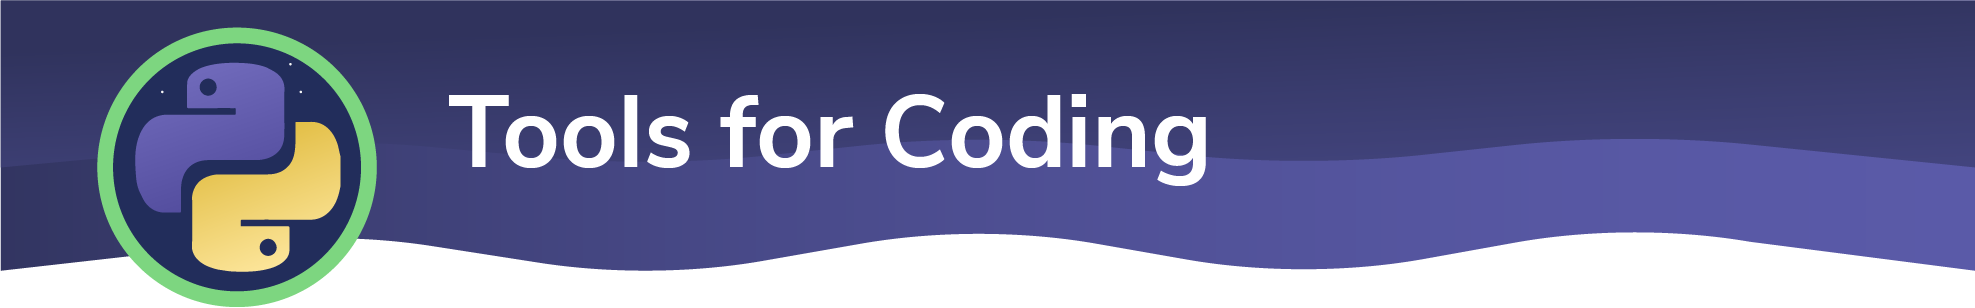 Tools for Coding banner